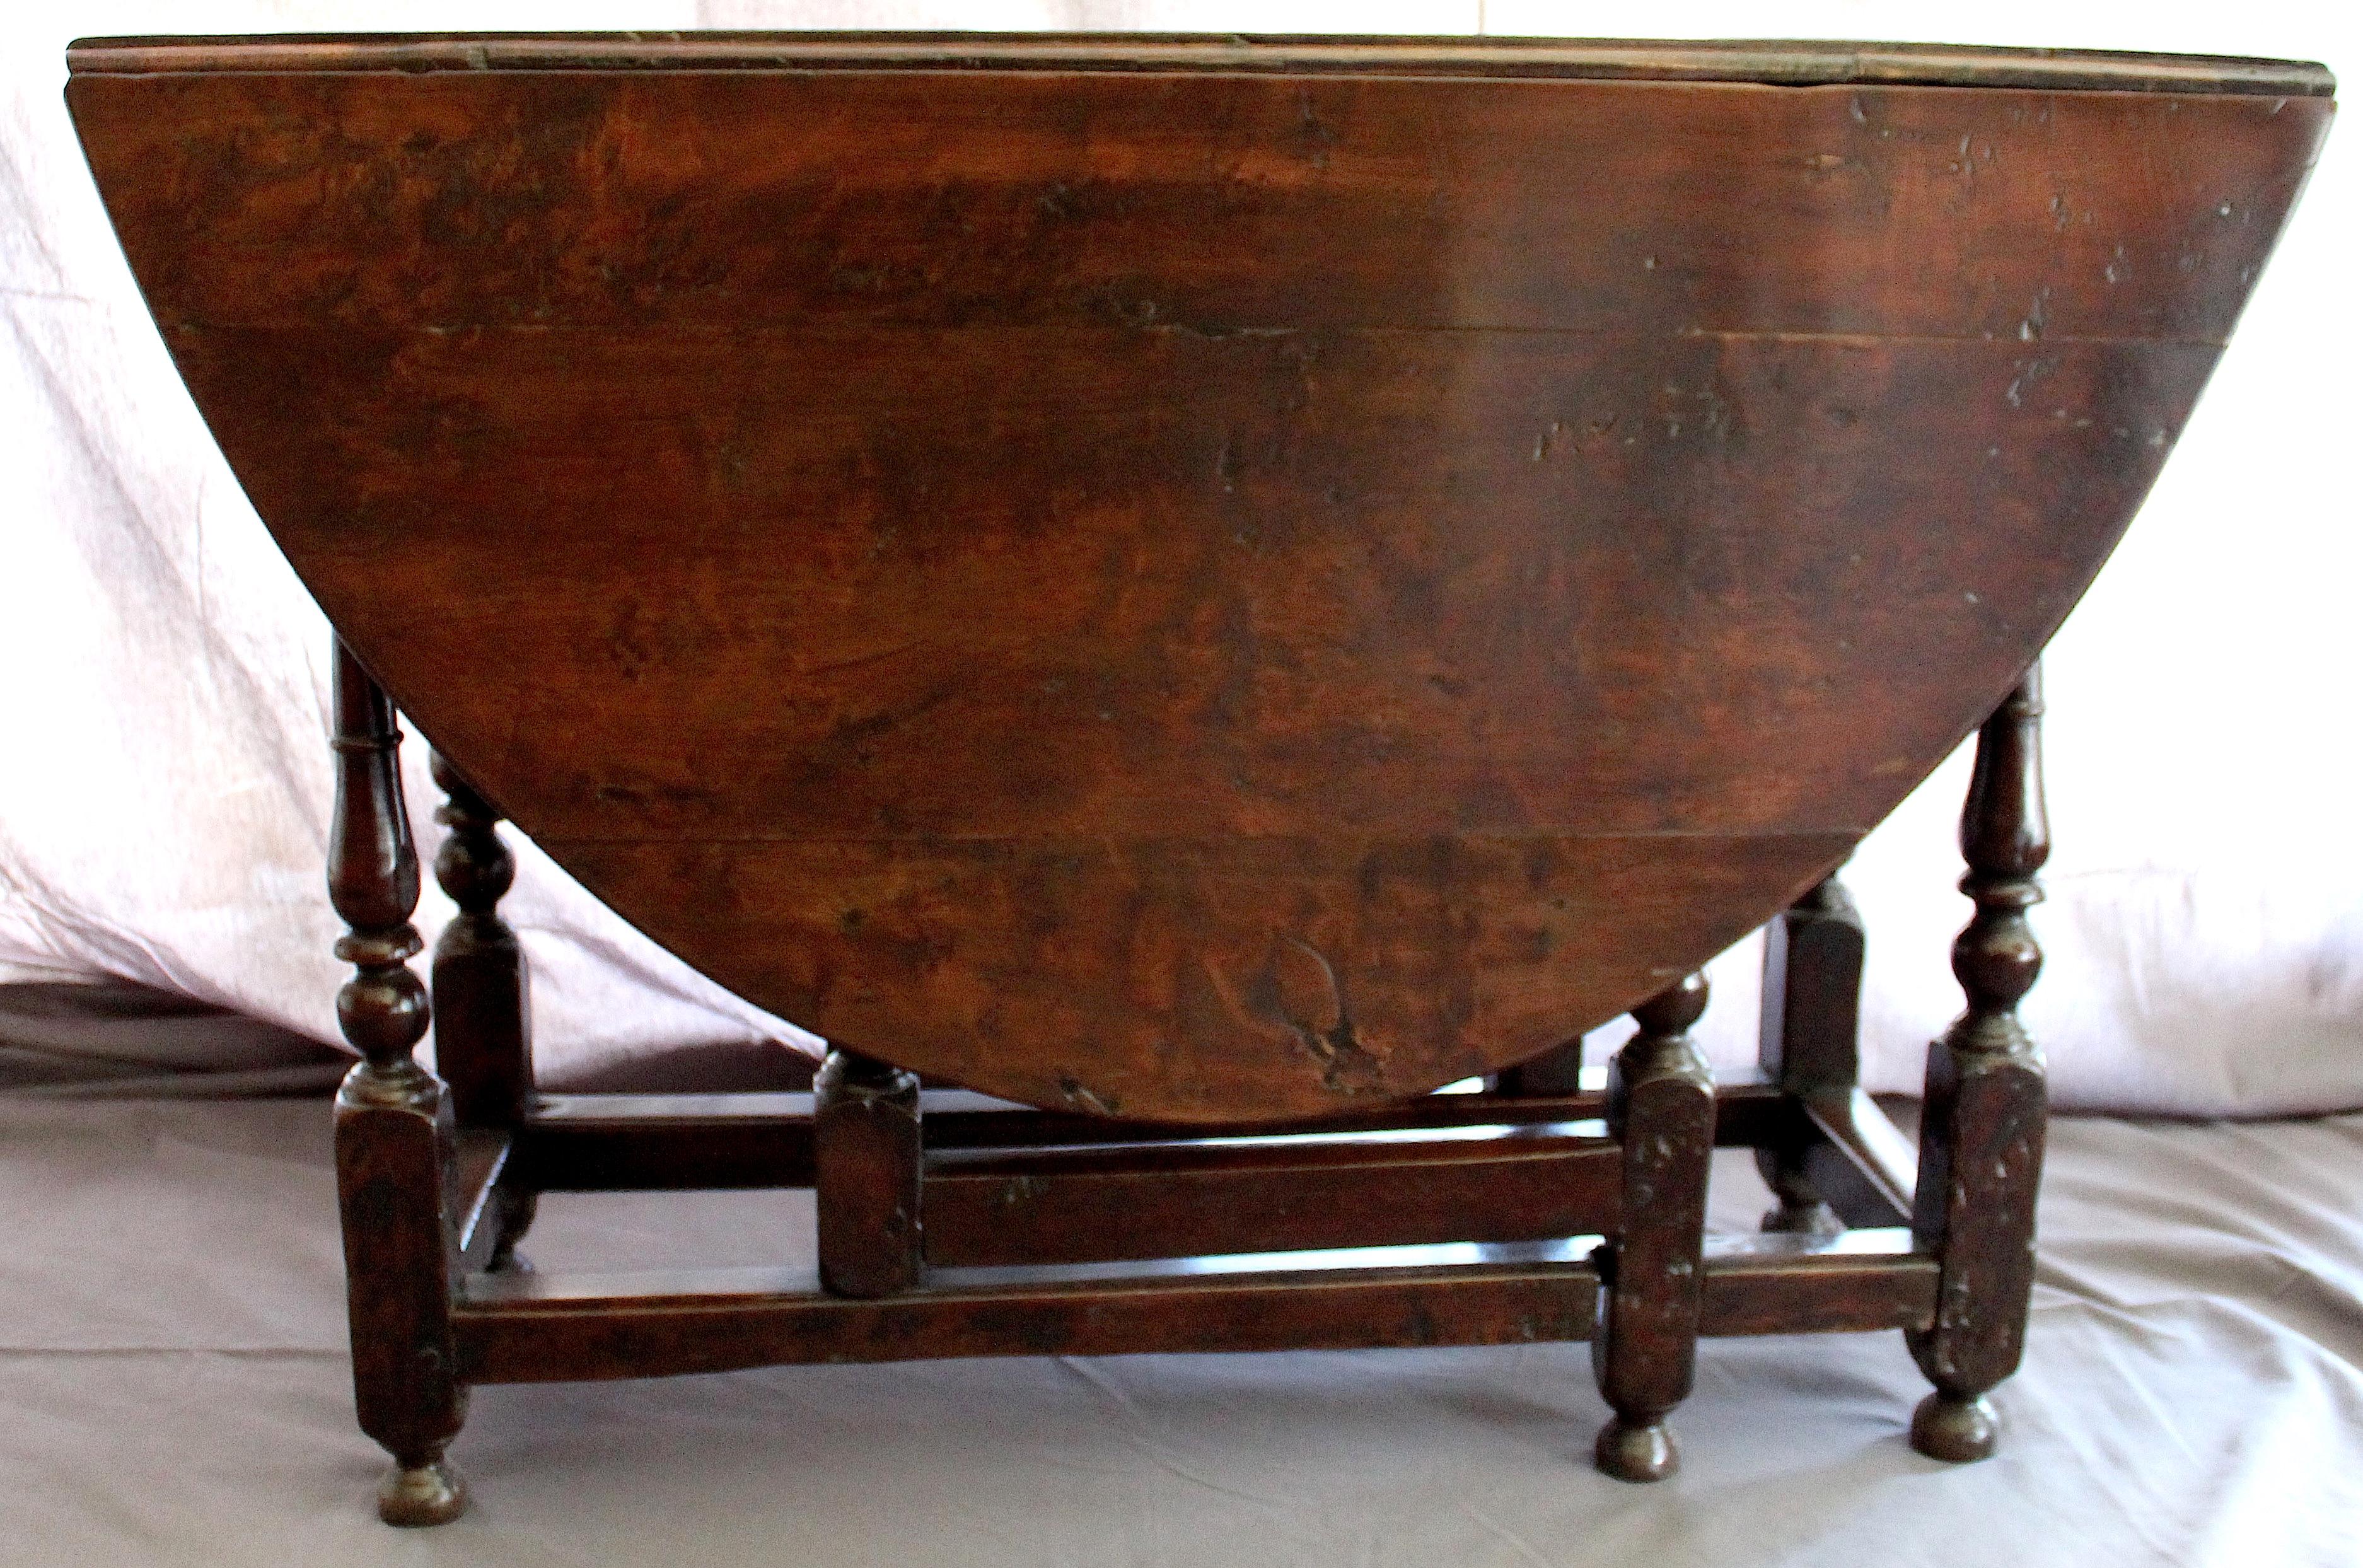 English walnut hate leg table circa 1685
A beautiful example of early English furniture with lovely color, beautiful ageing and with centre panel two drop leaves and carved folding legs beneath.